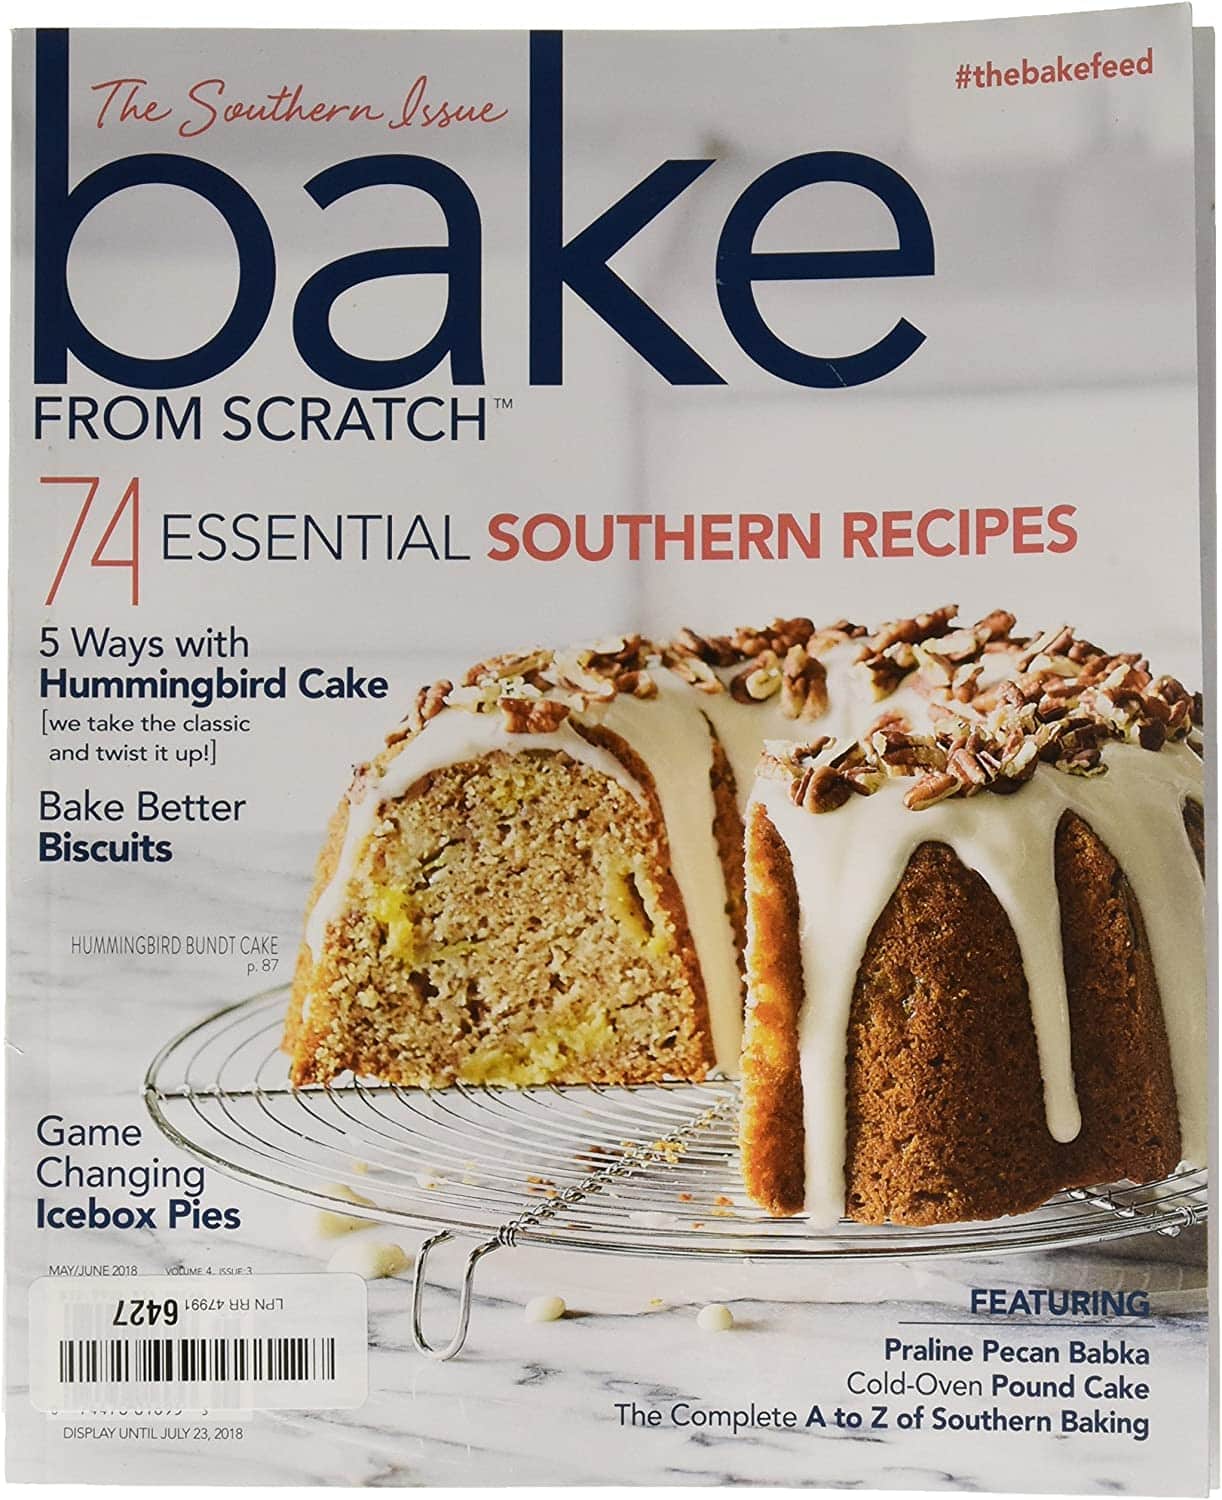 BAKE FROM SCRATCH: Amazon.com: Magazines